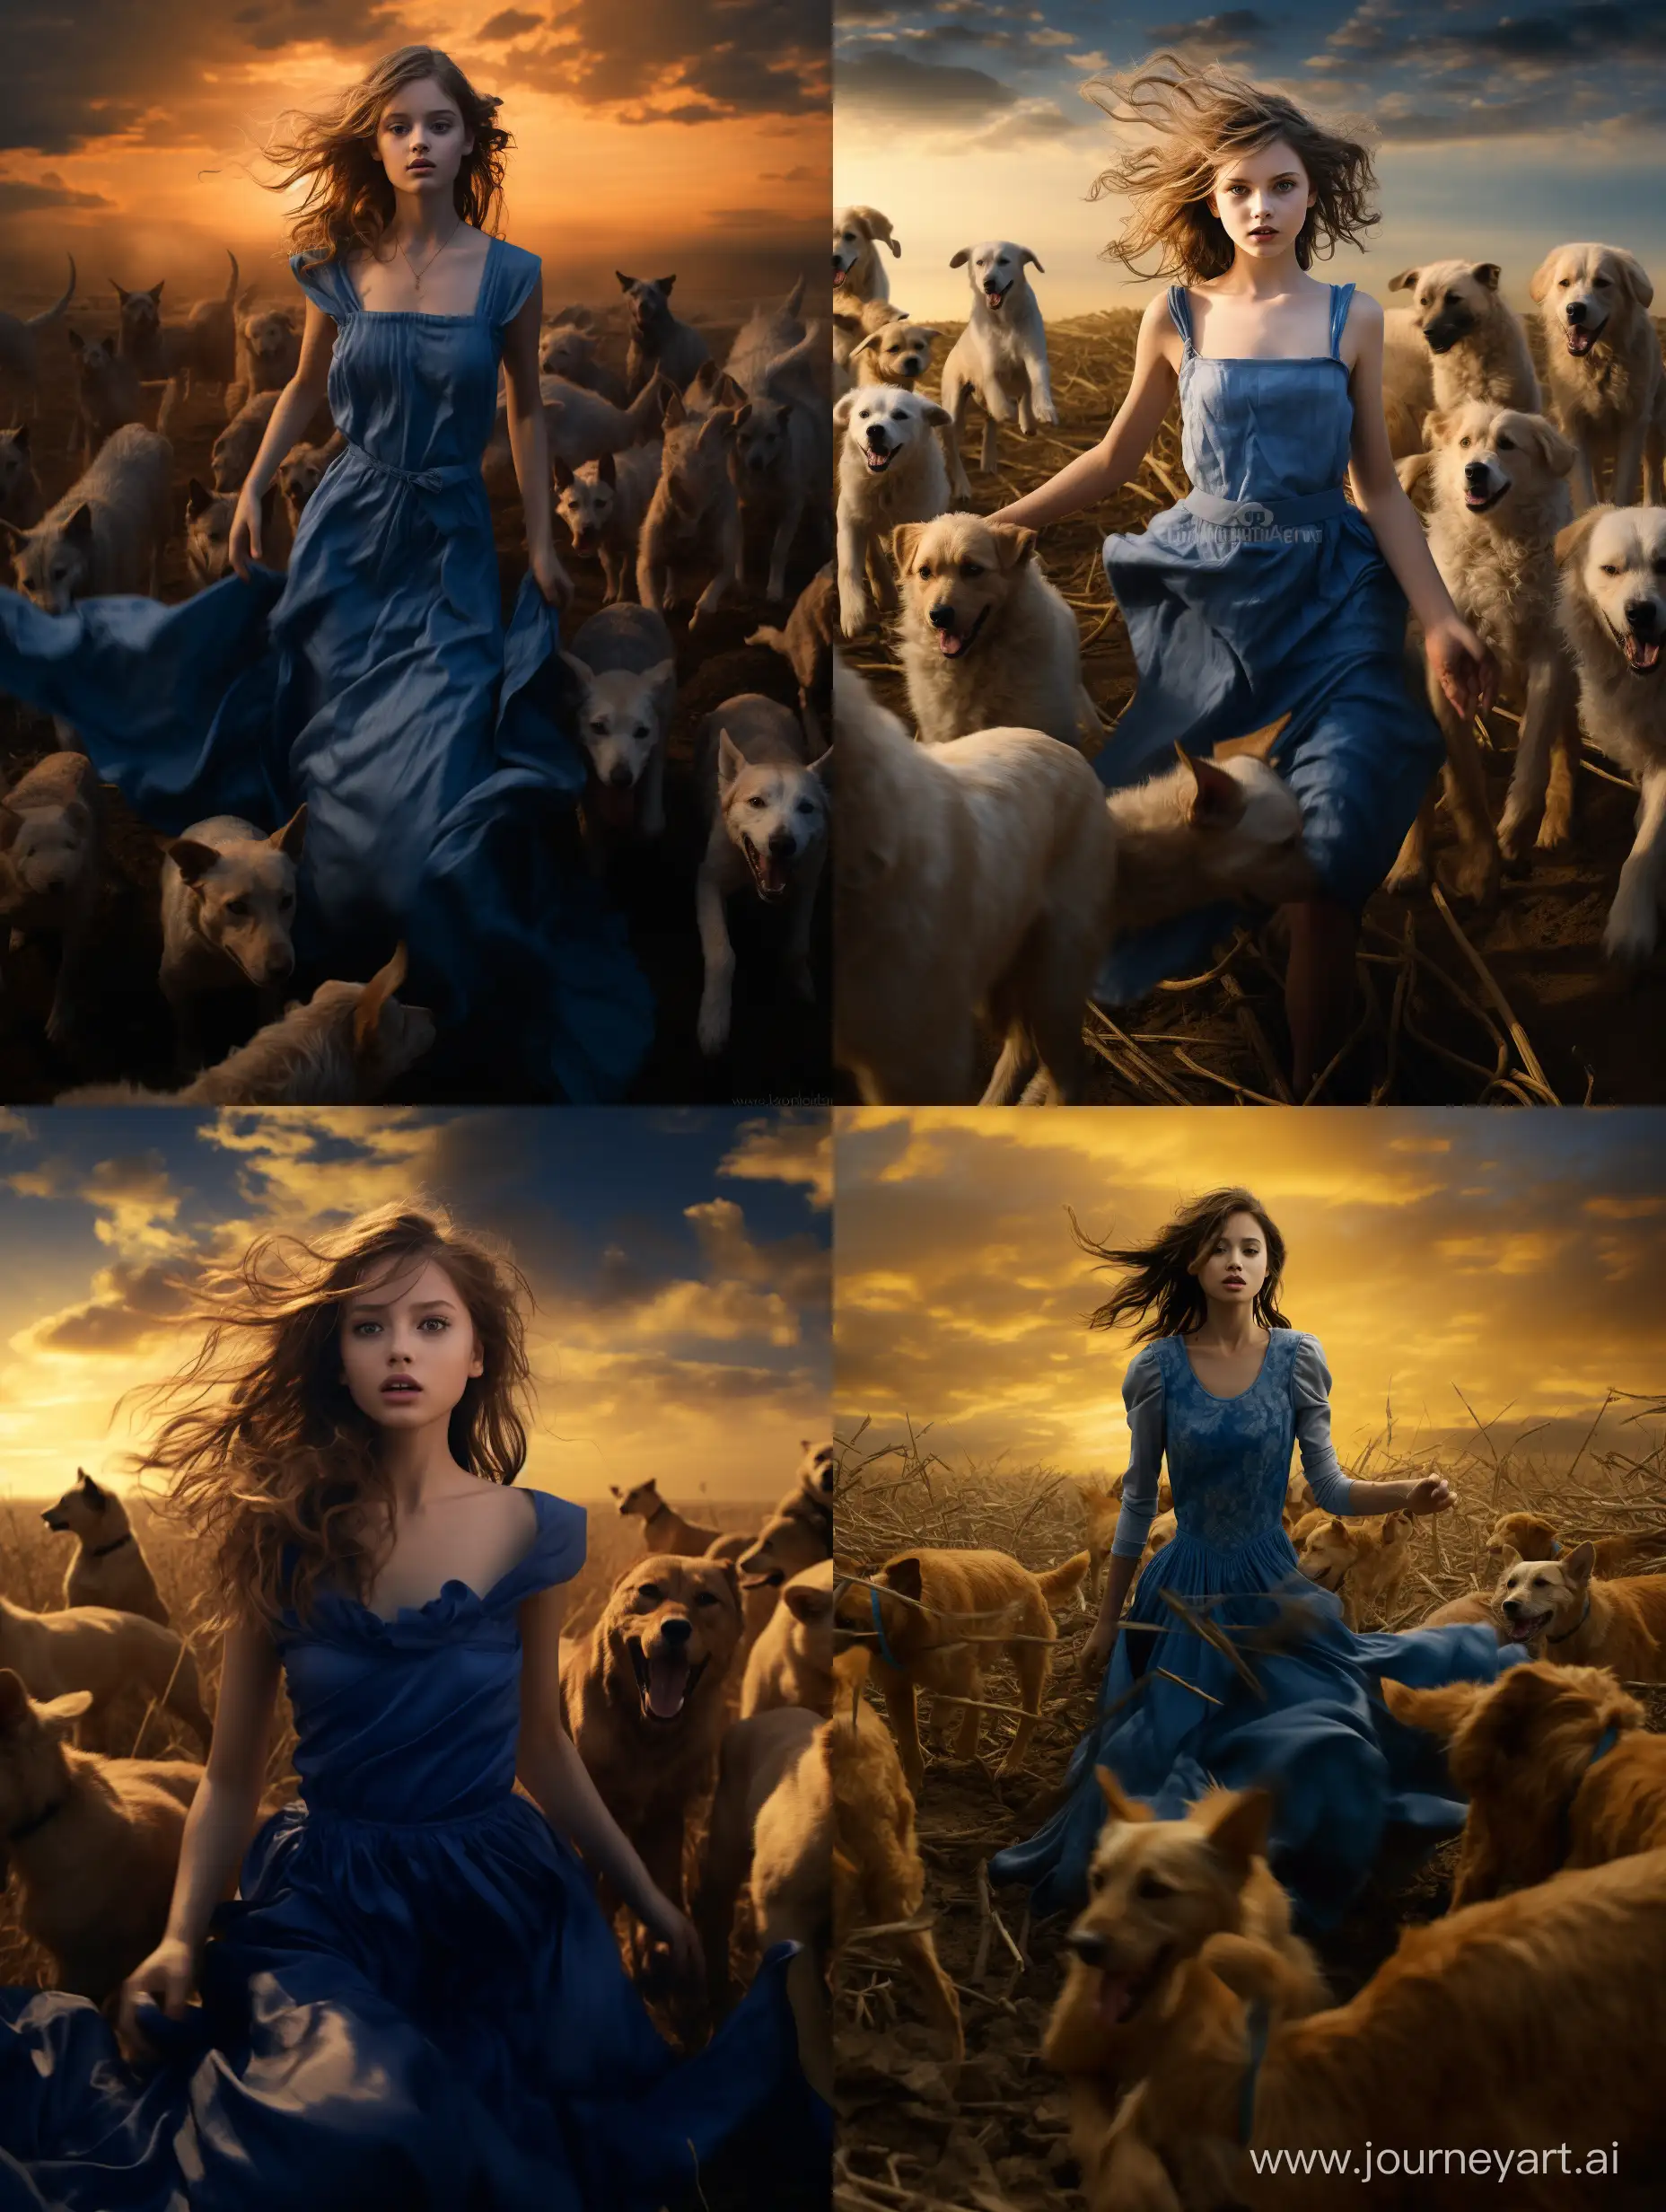 young girl in middle of war, wearing blue dress, escaping from dogs, golden hour v6